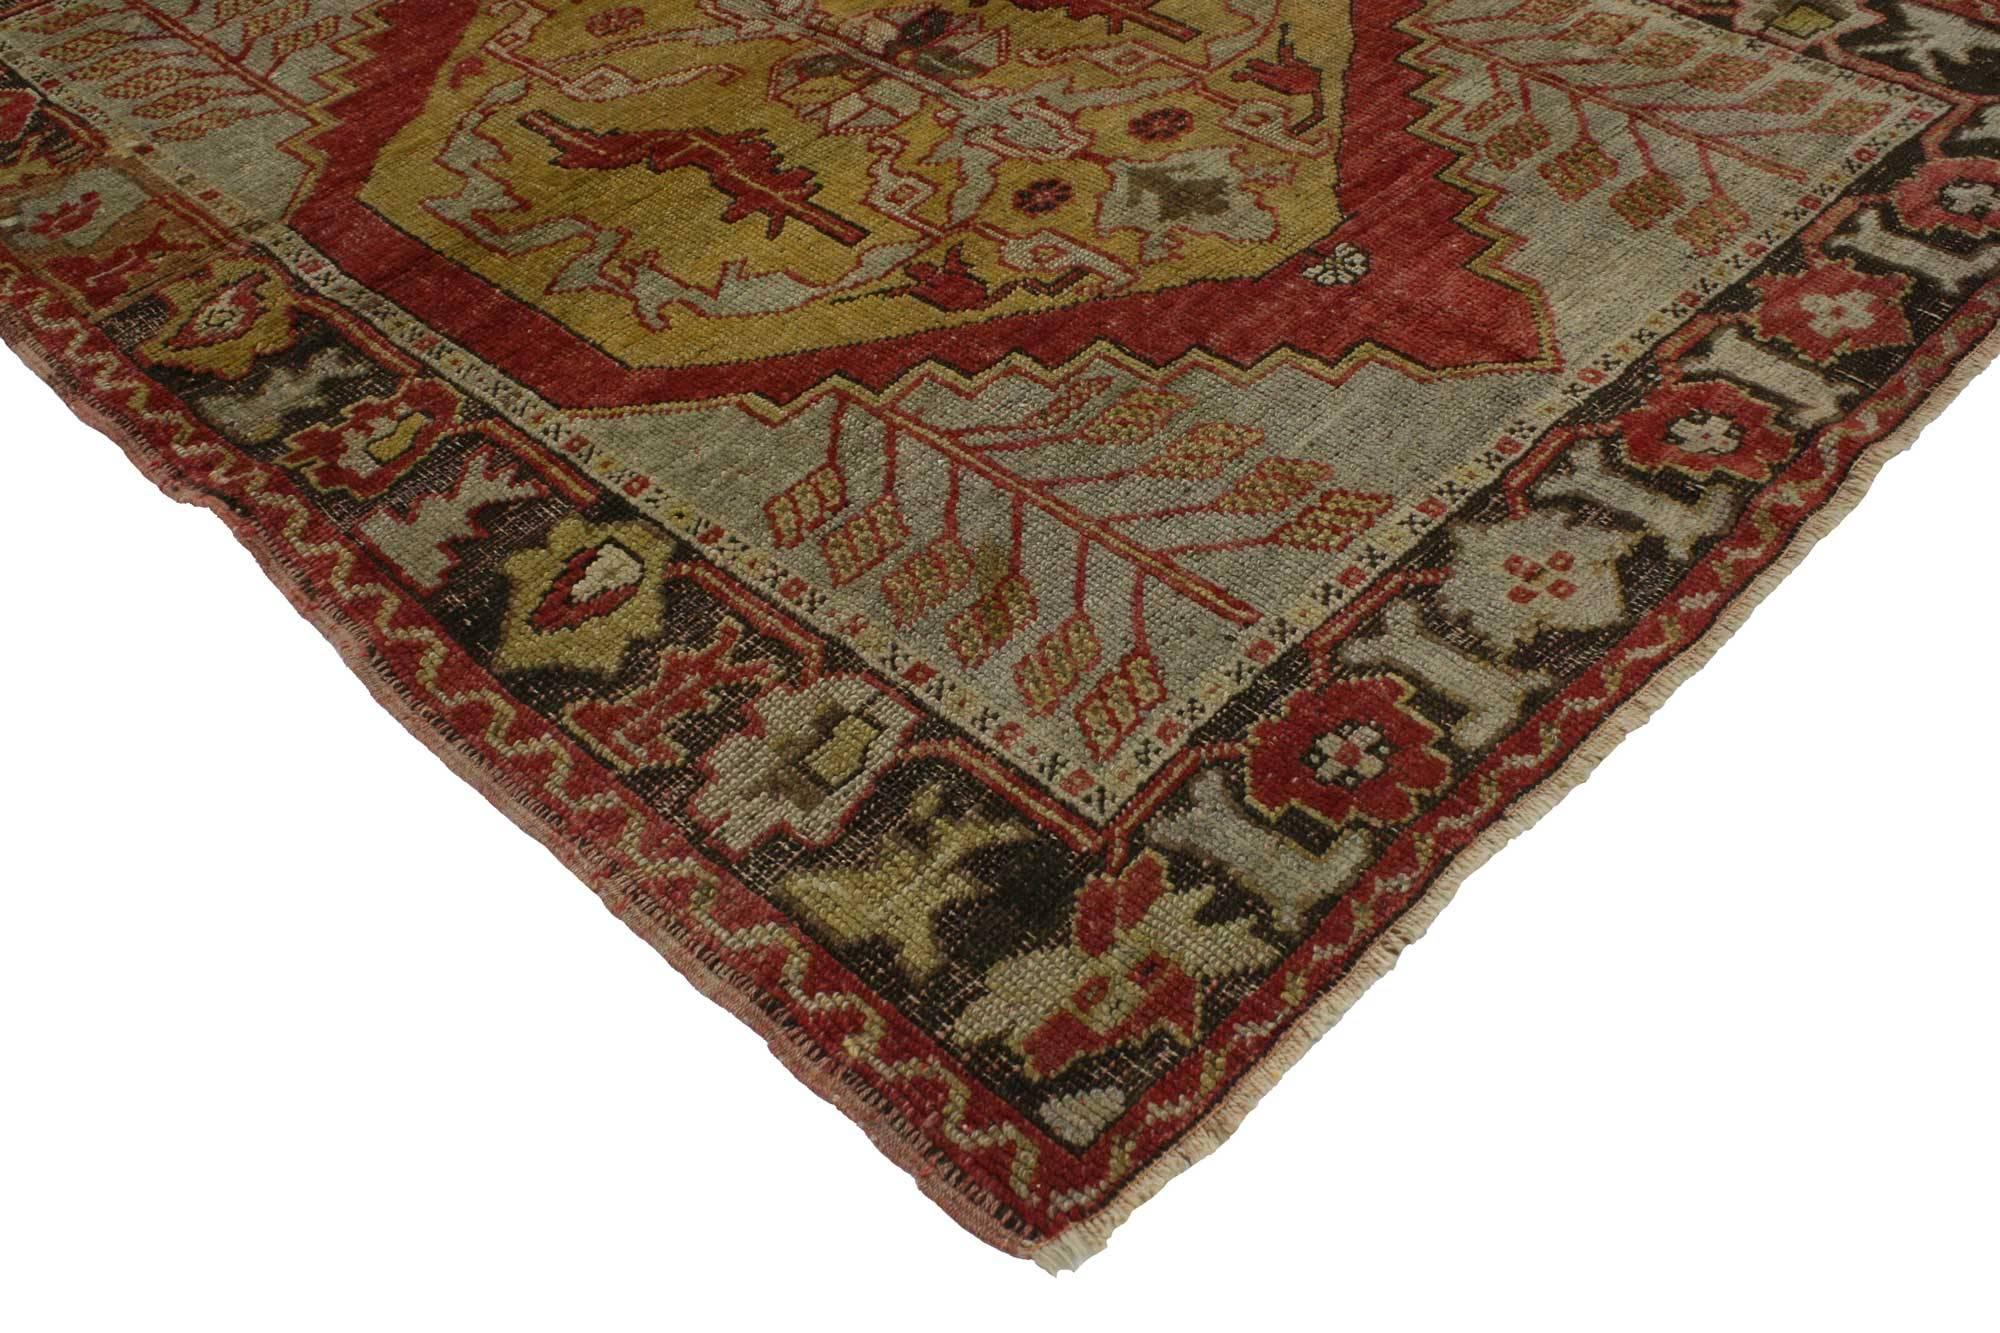 51657 vintage Turkish Oushak accent rug with geometric floral motif. This unique Turkish Oushak accent rug with traditional modern style features a central hexagonal medallion in red filled with a Arylide yellow centre. The medallion depicts a